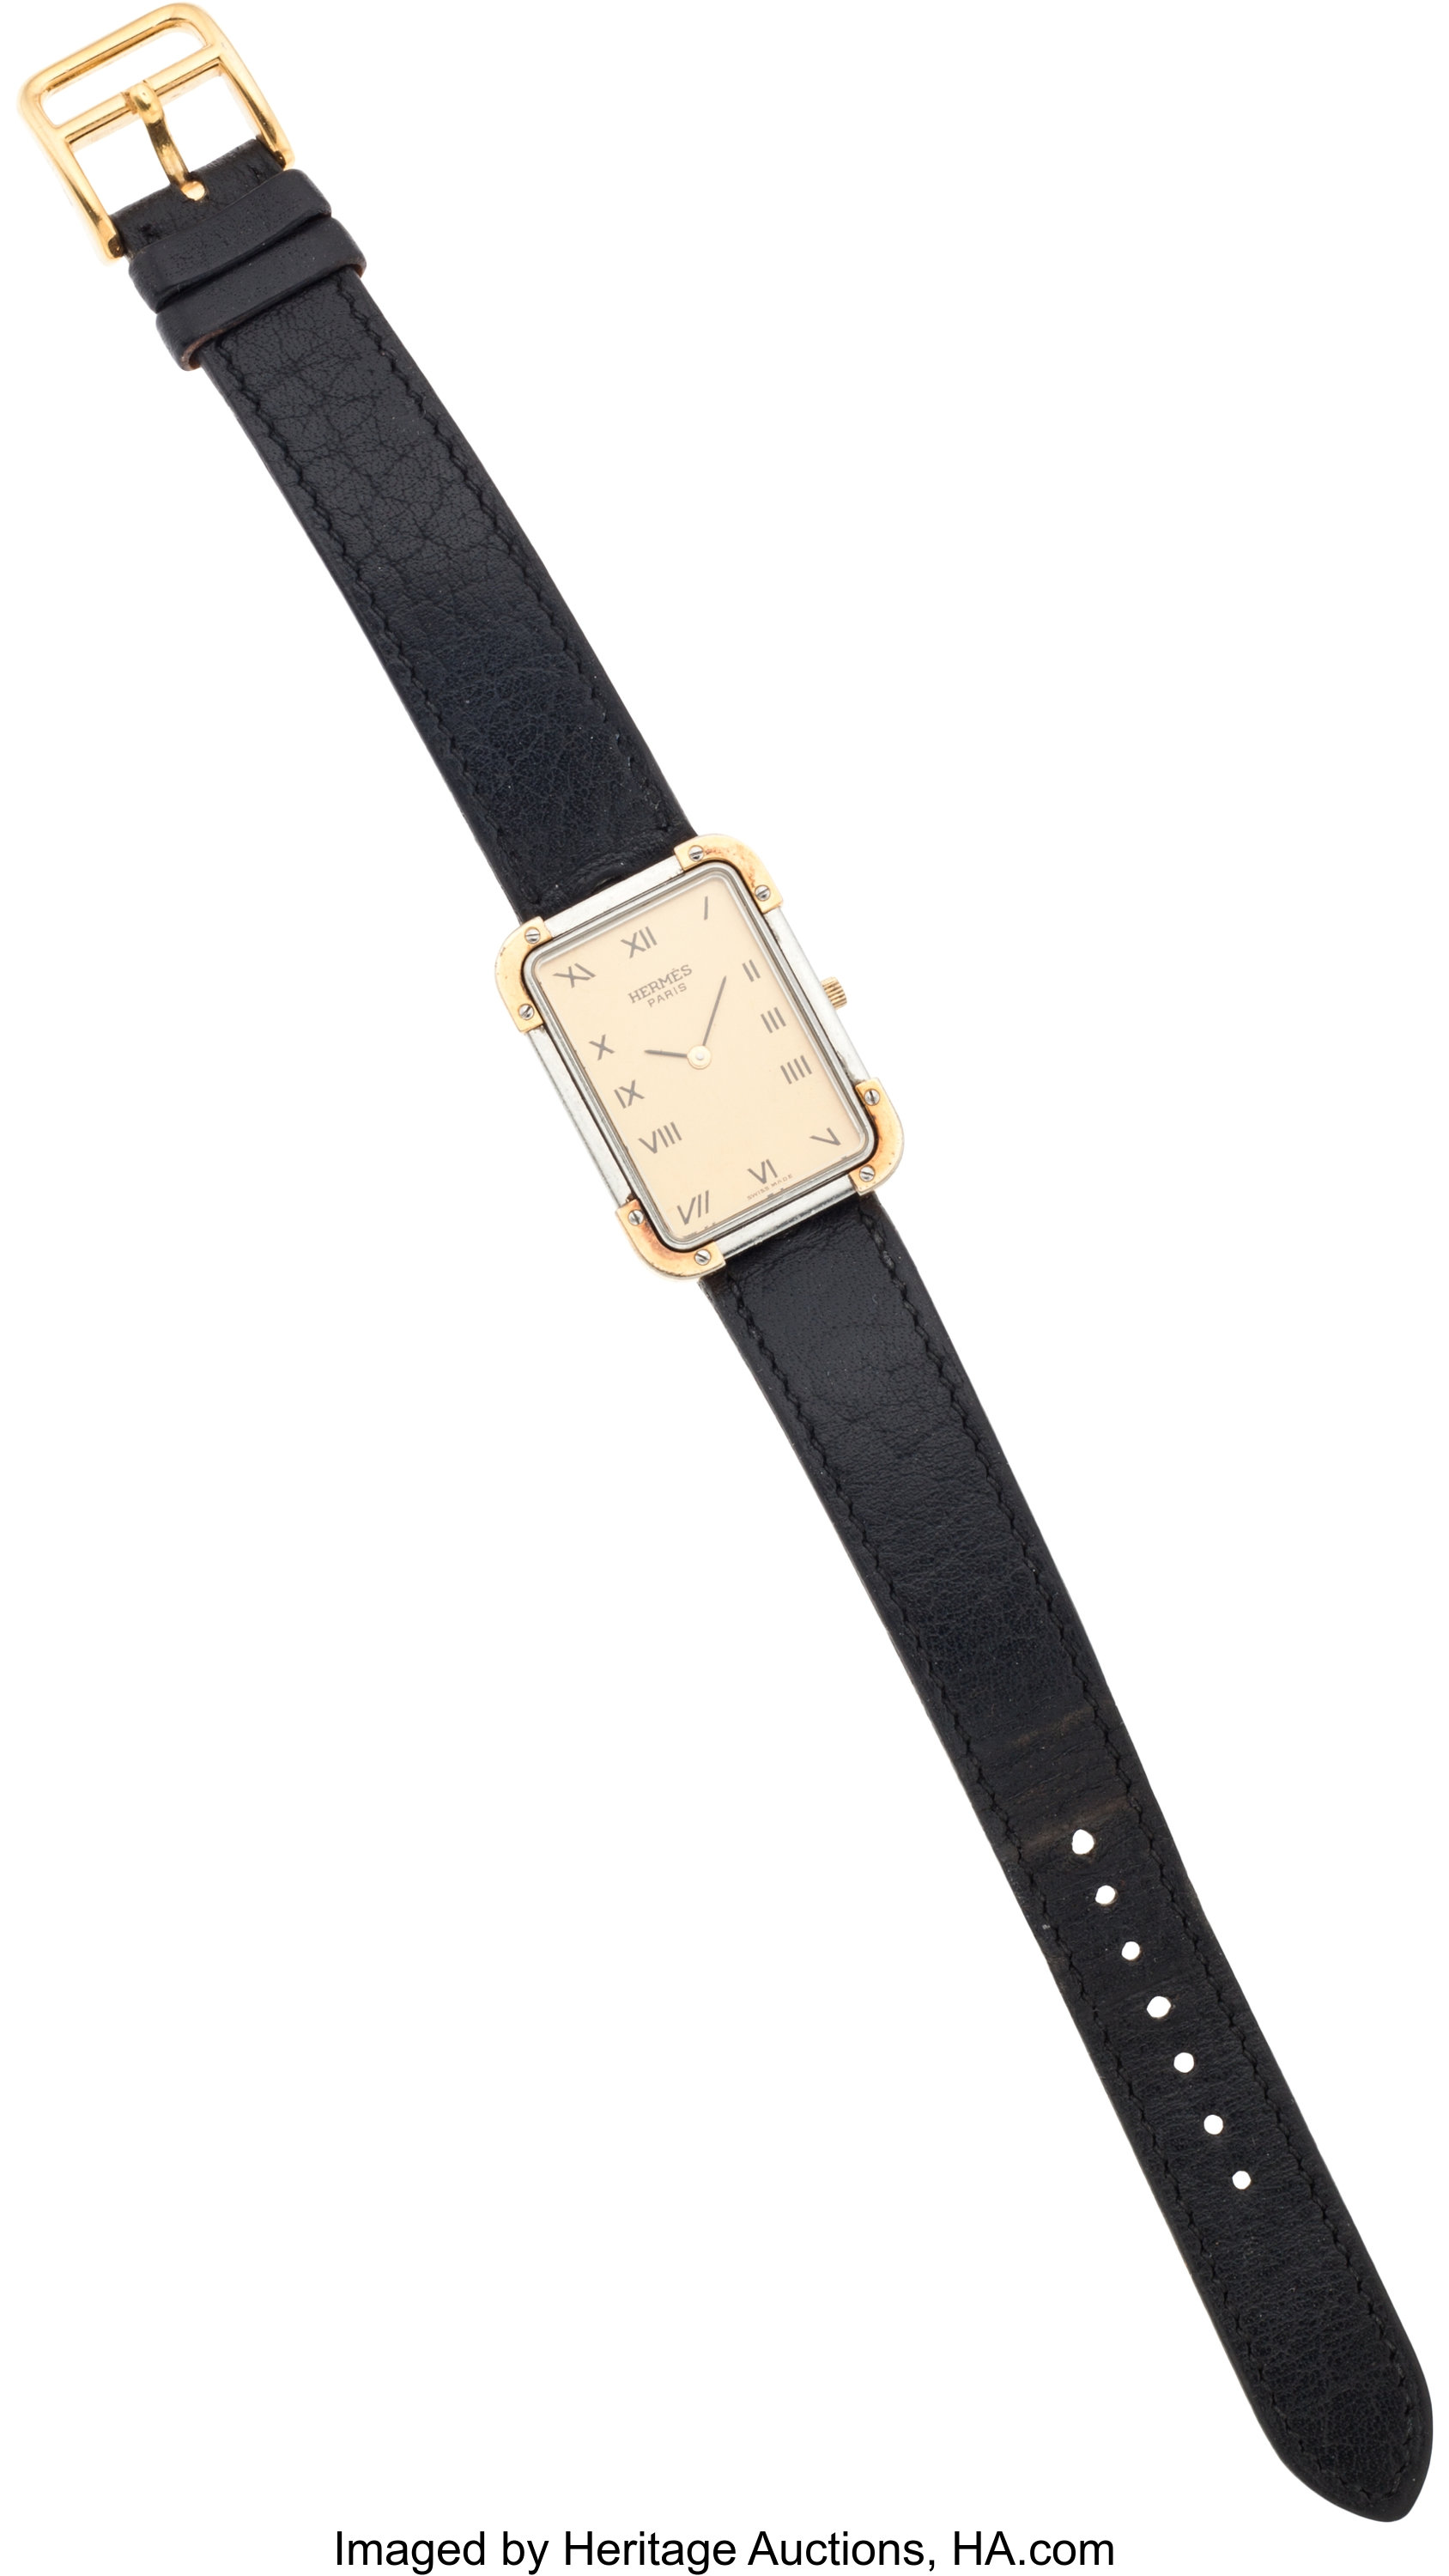 Sold at Auction: AN HERMES BLACK LEATHER BARENIA WATCH STRAP, size